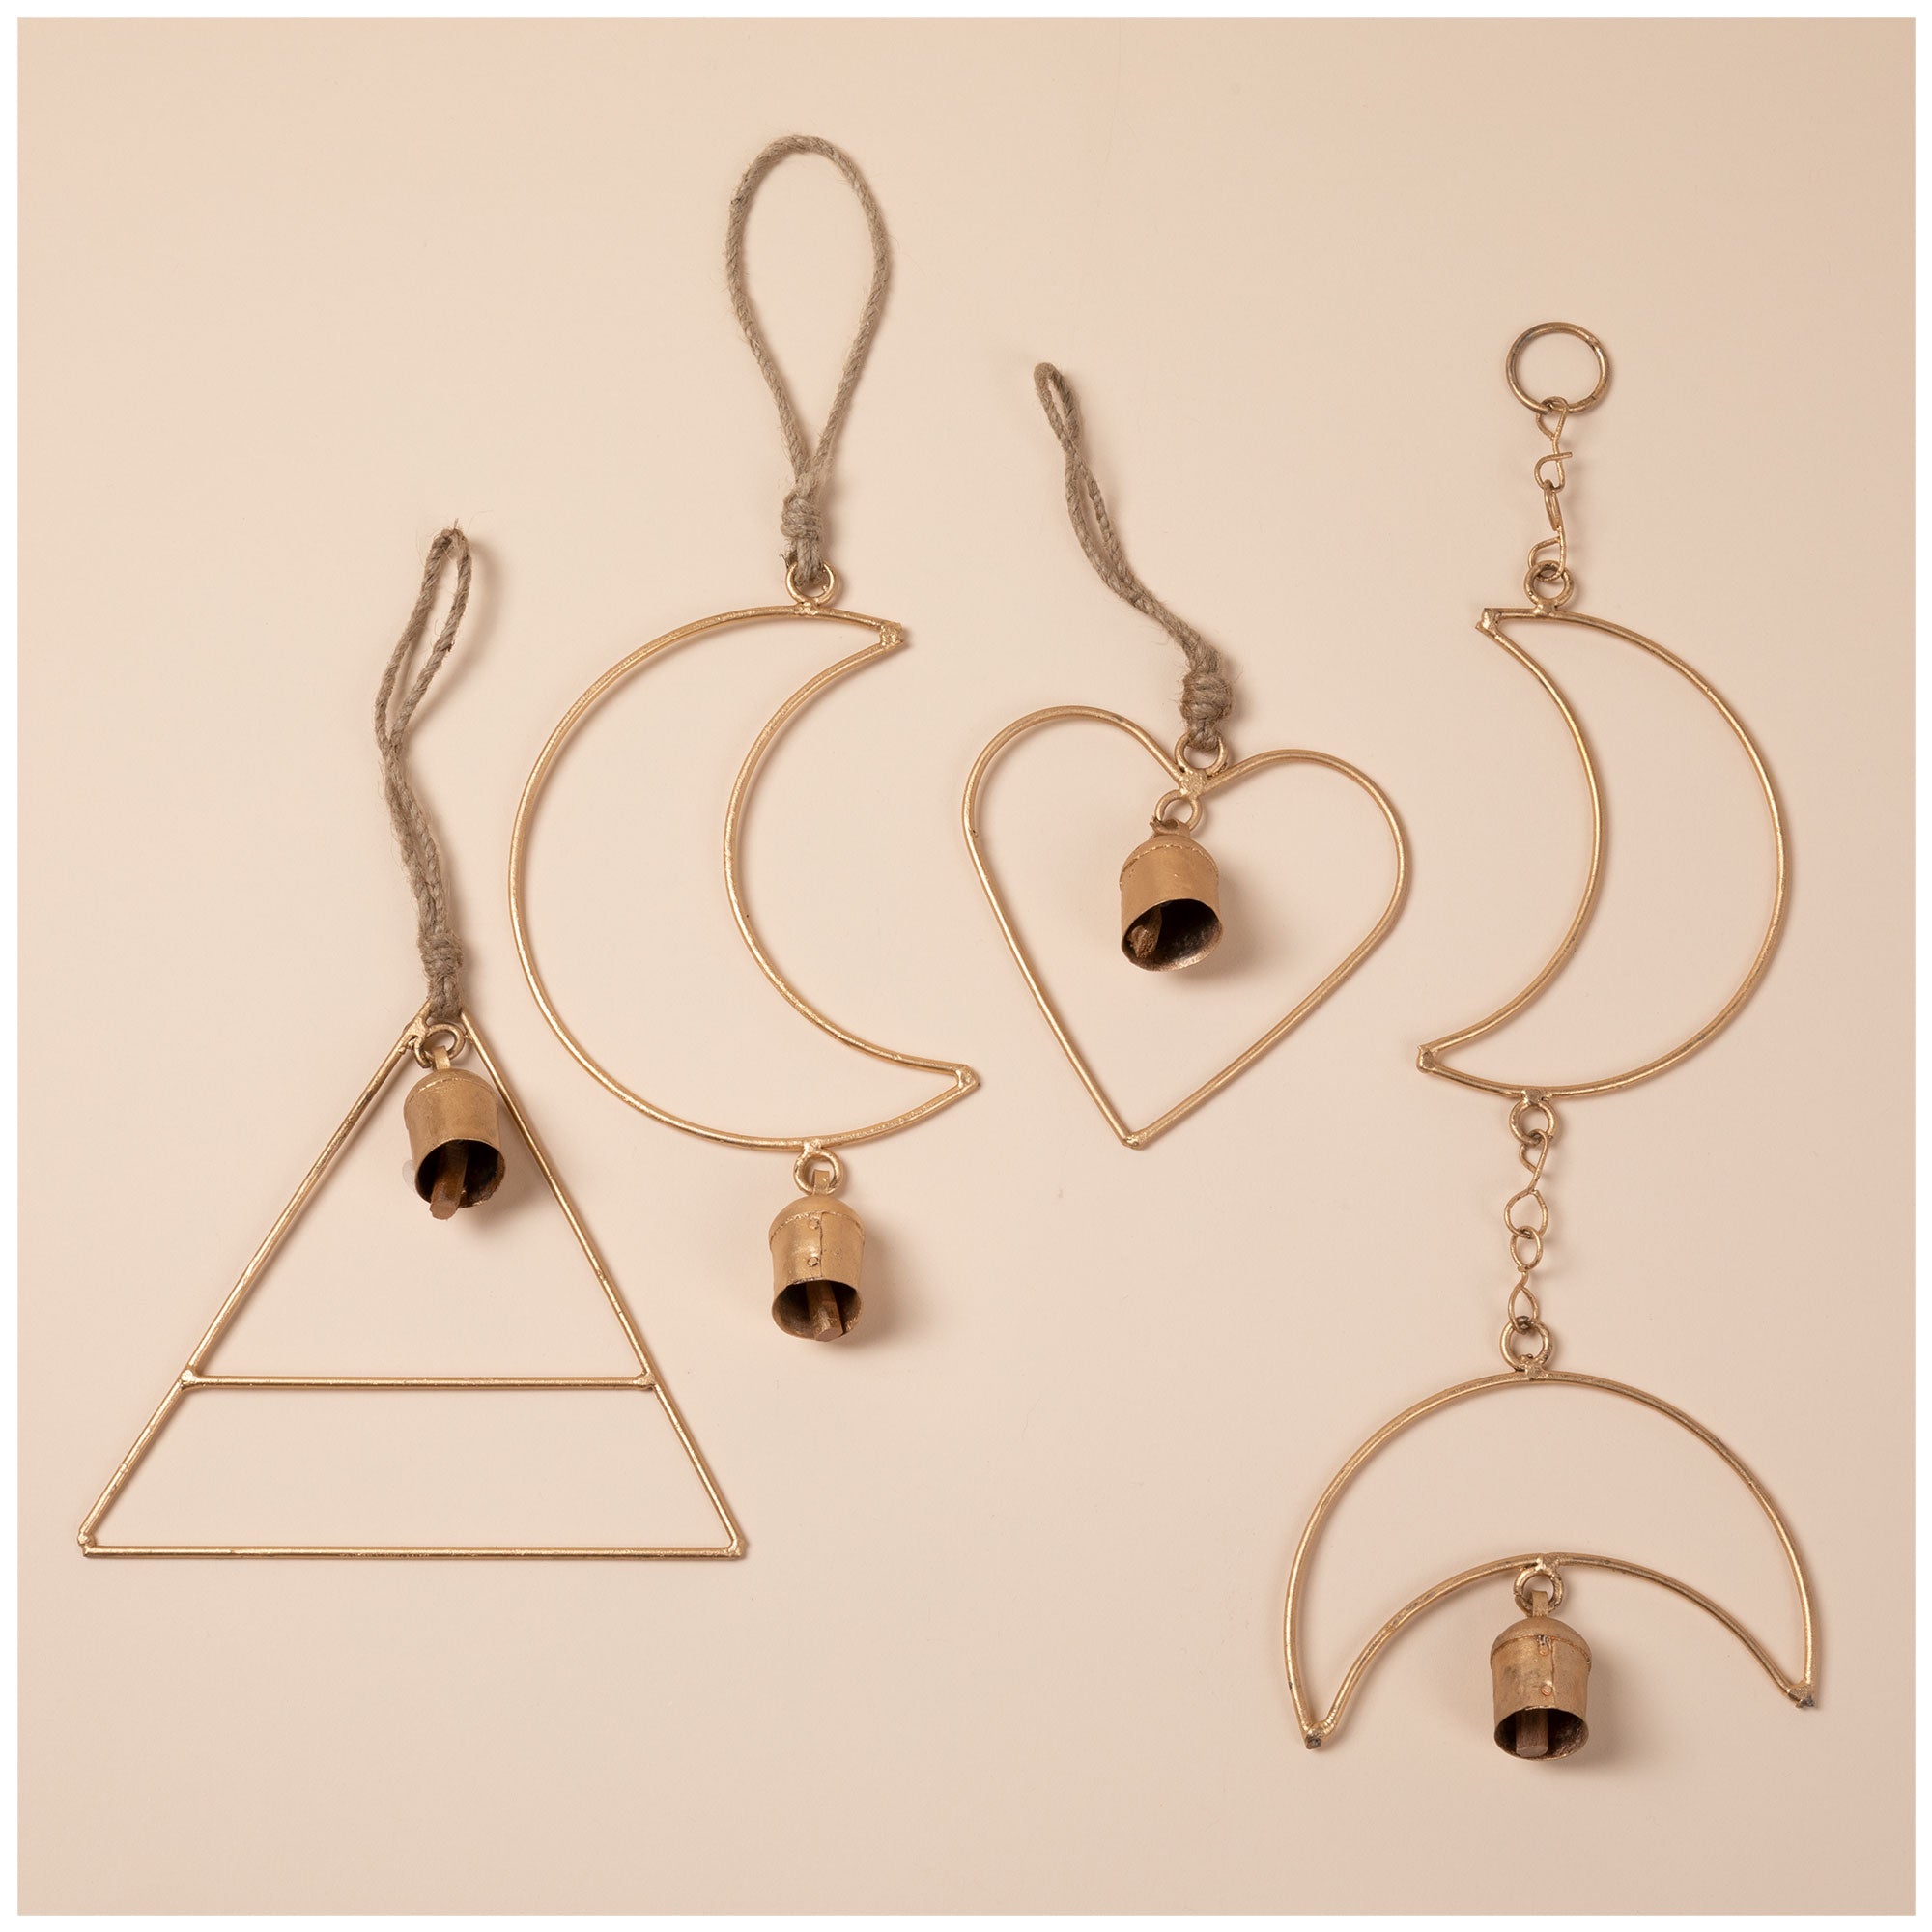 Single Bell Iron Wind Chime - Double Moon